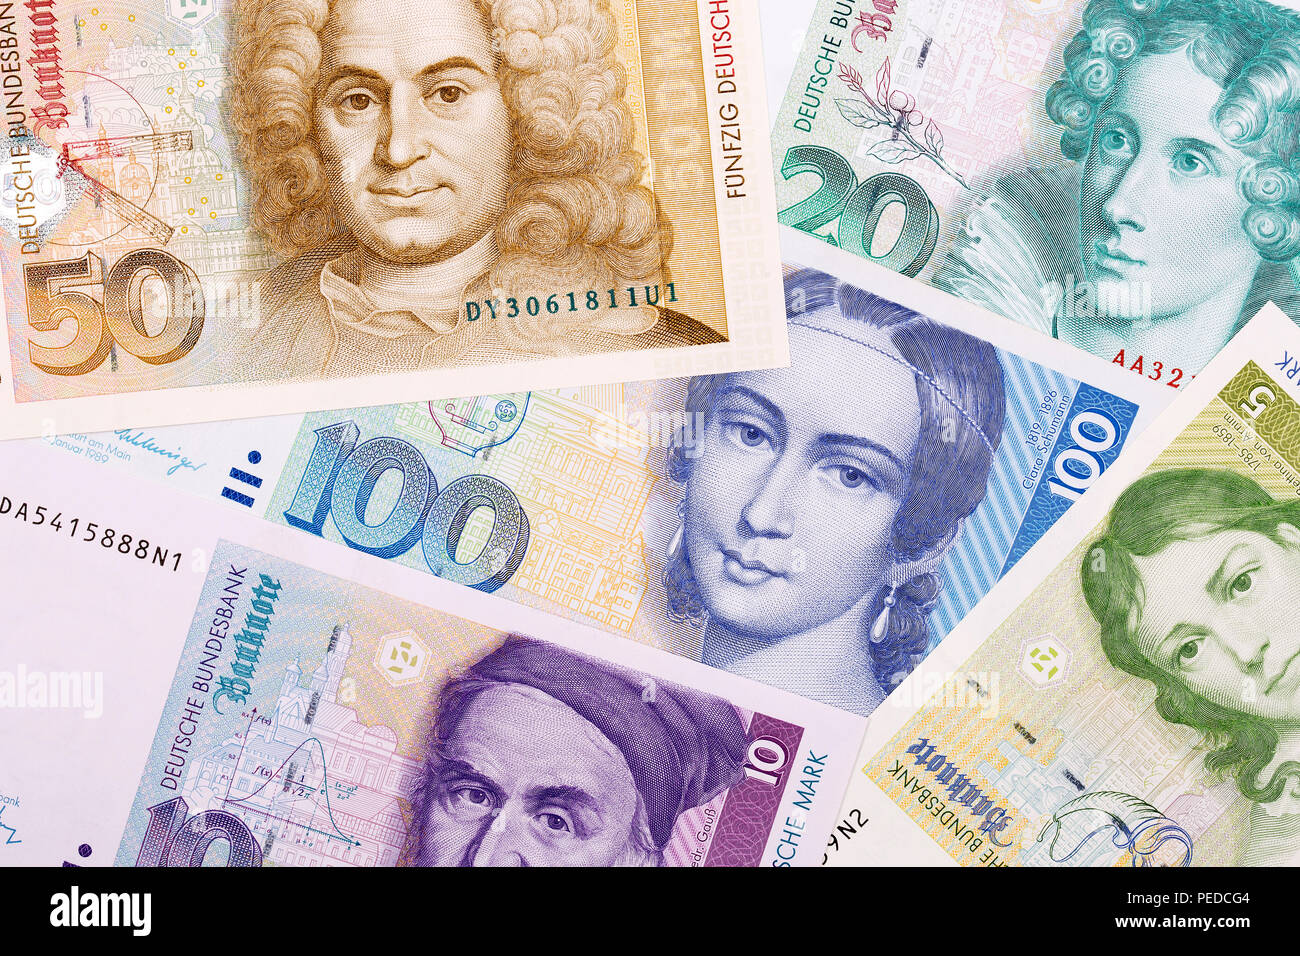 Old money from West Germany, a background Stock Photo